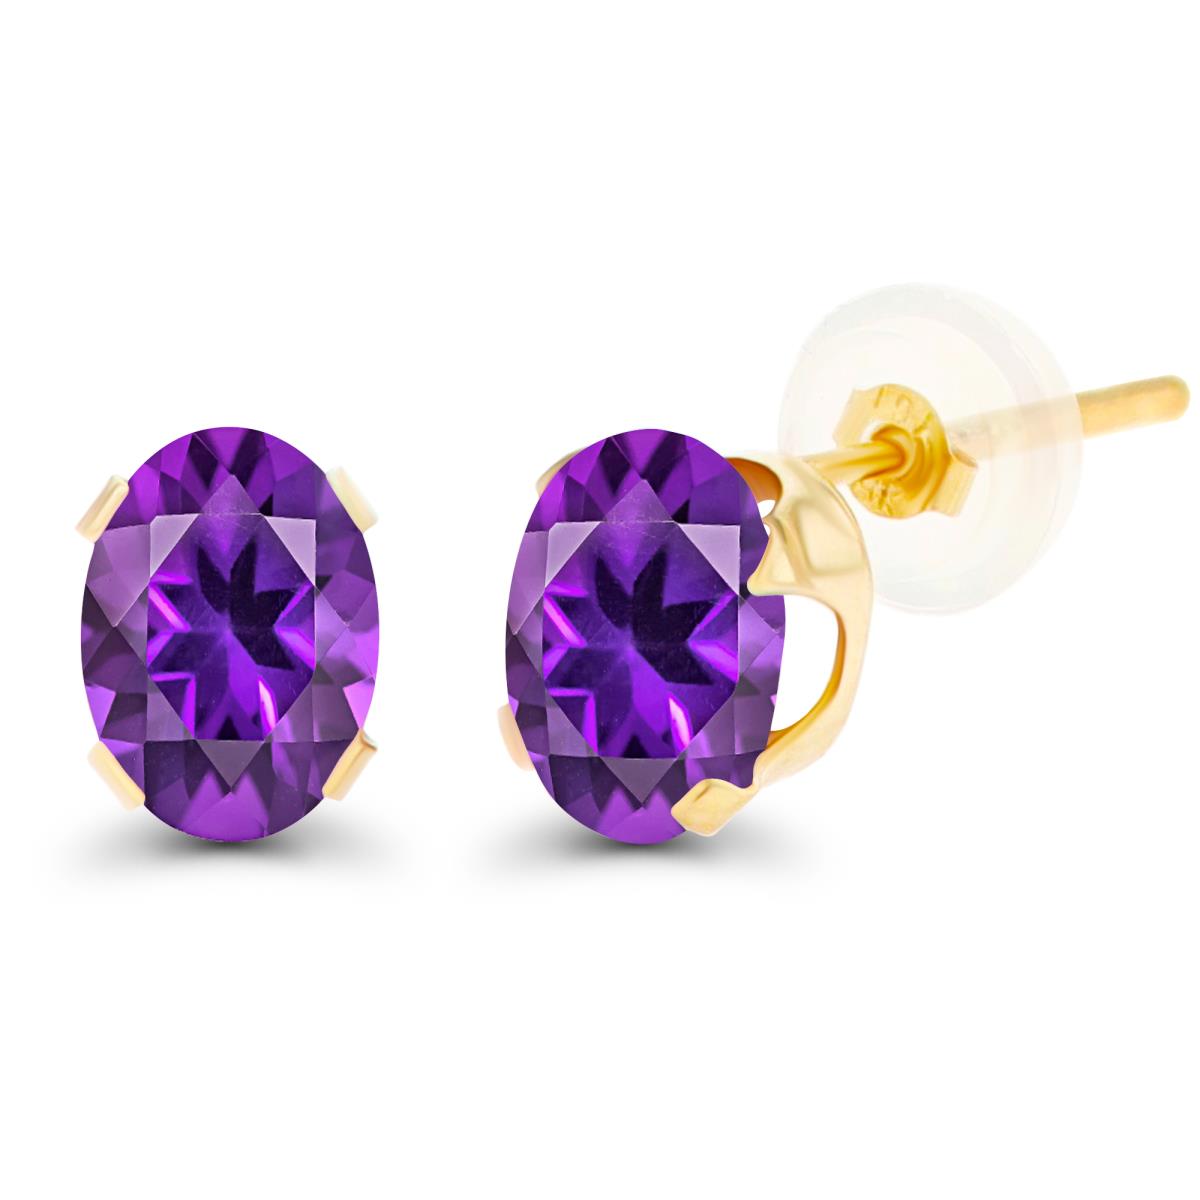 Sterling Silver Yellow 7x5mm Oval Amethyst Stud Earring with Clutch